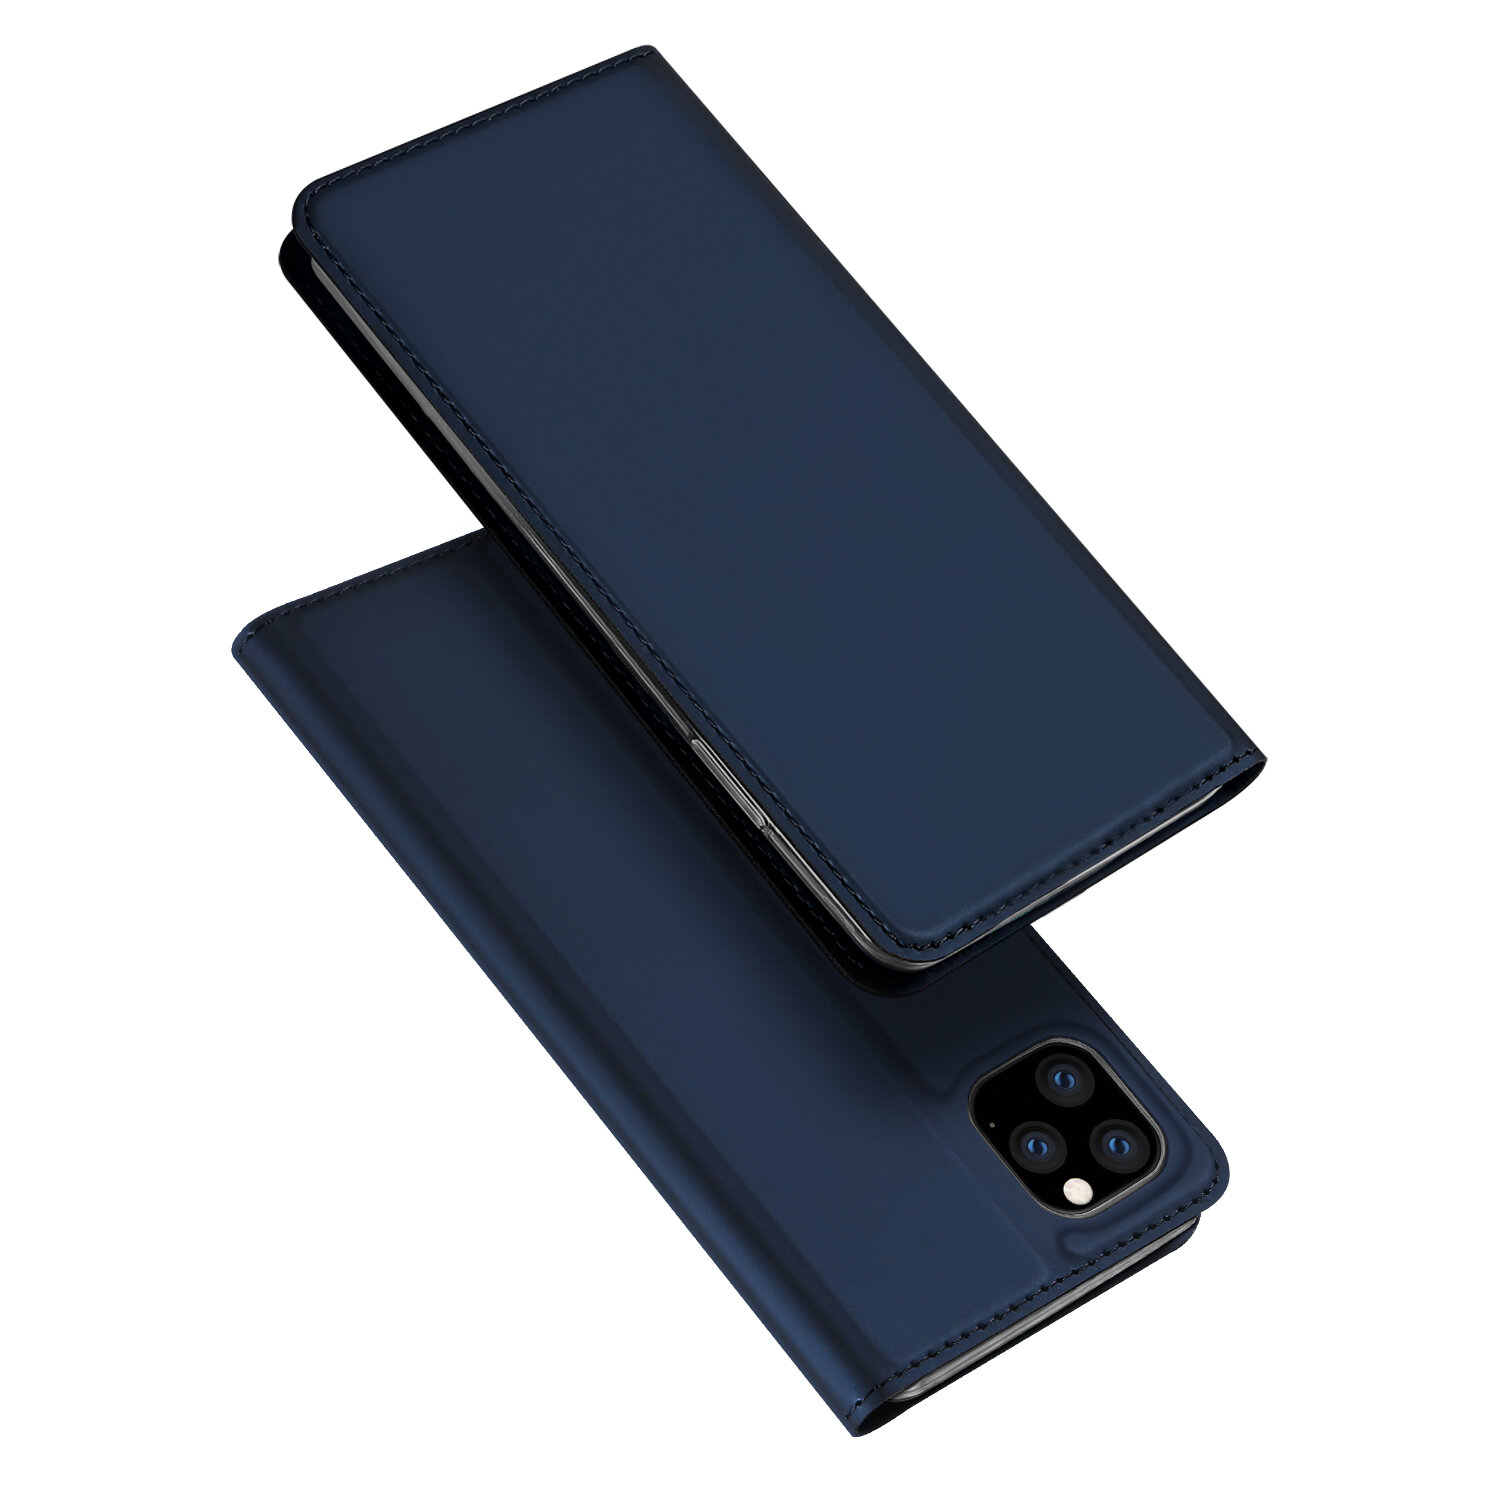 DUX DUCIS Flip Magnetic Shockproof with Card Slot PU Leather Protective Case for iPhone 11 Pro 5.8 i